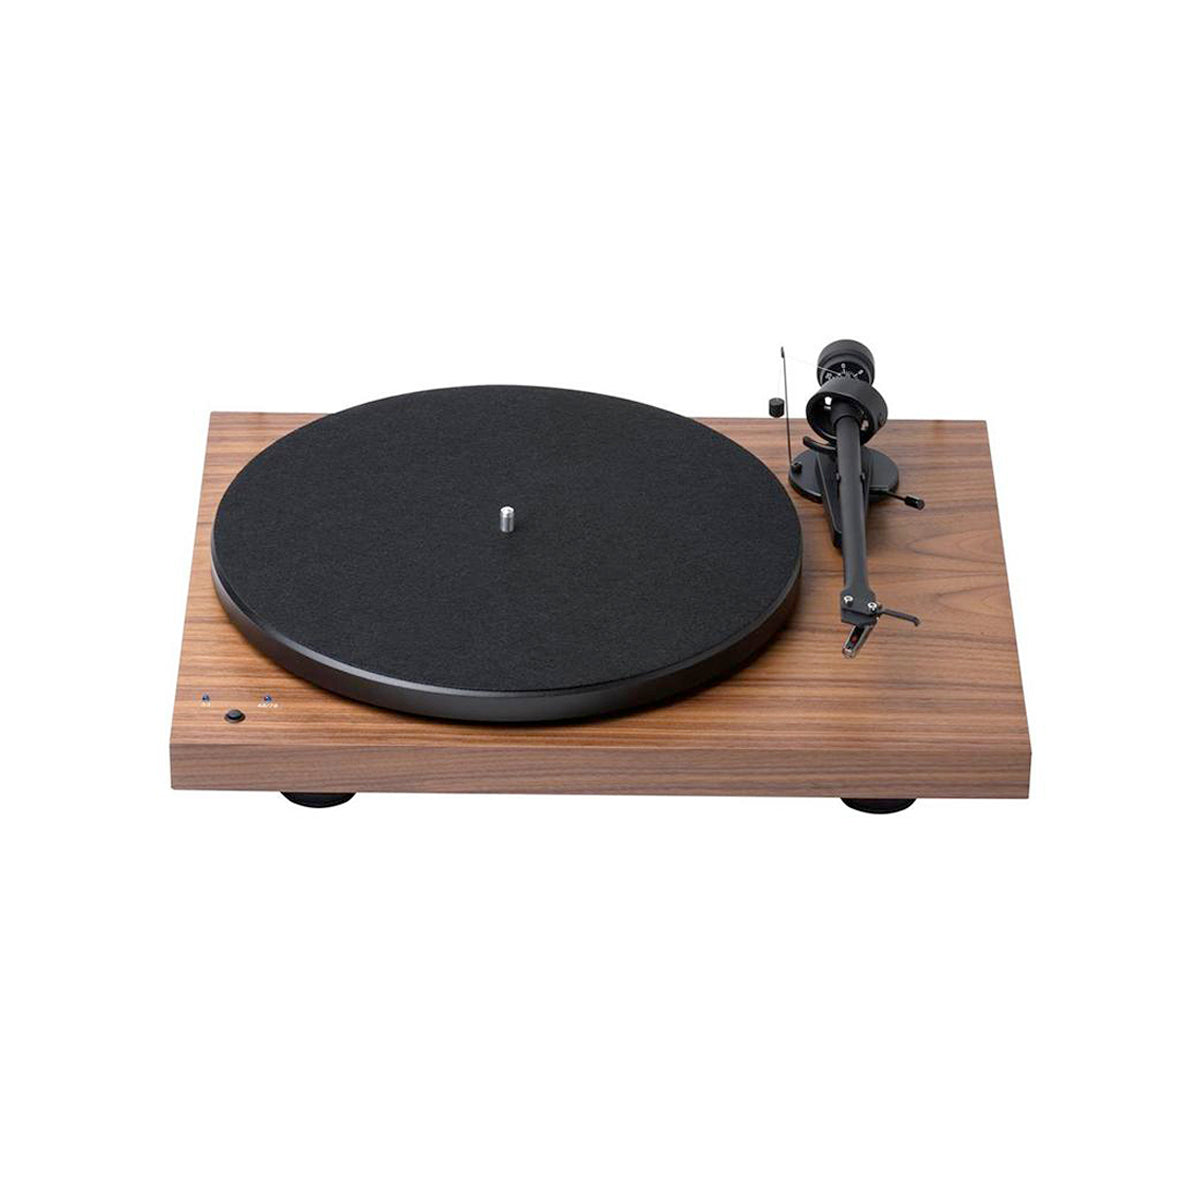 Pro-Ject Debut RecordMaster with Ortofon OM10 Cartridge - Walnut - The Audio Experts